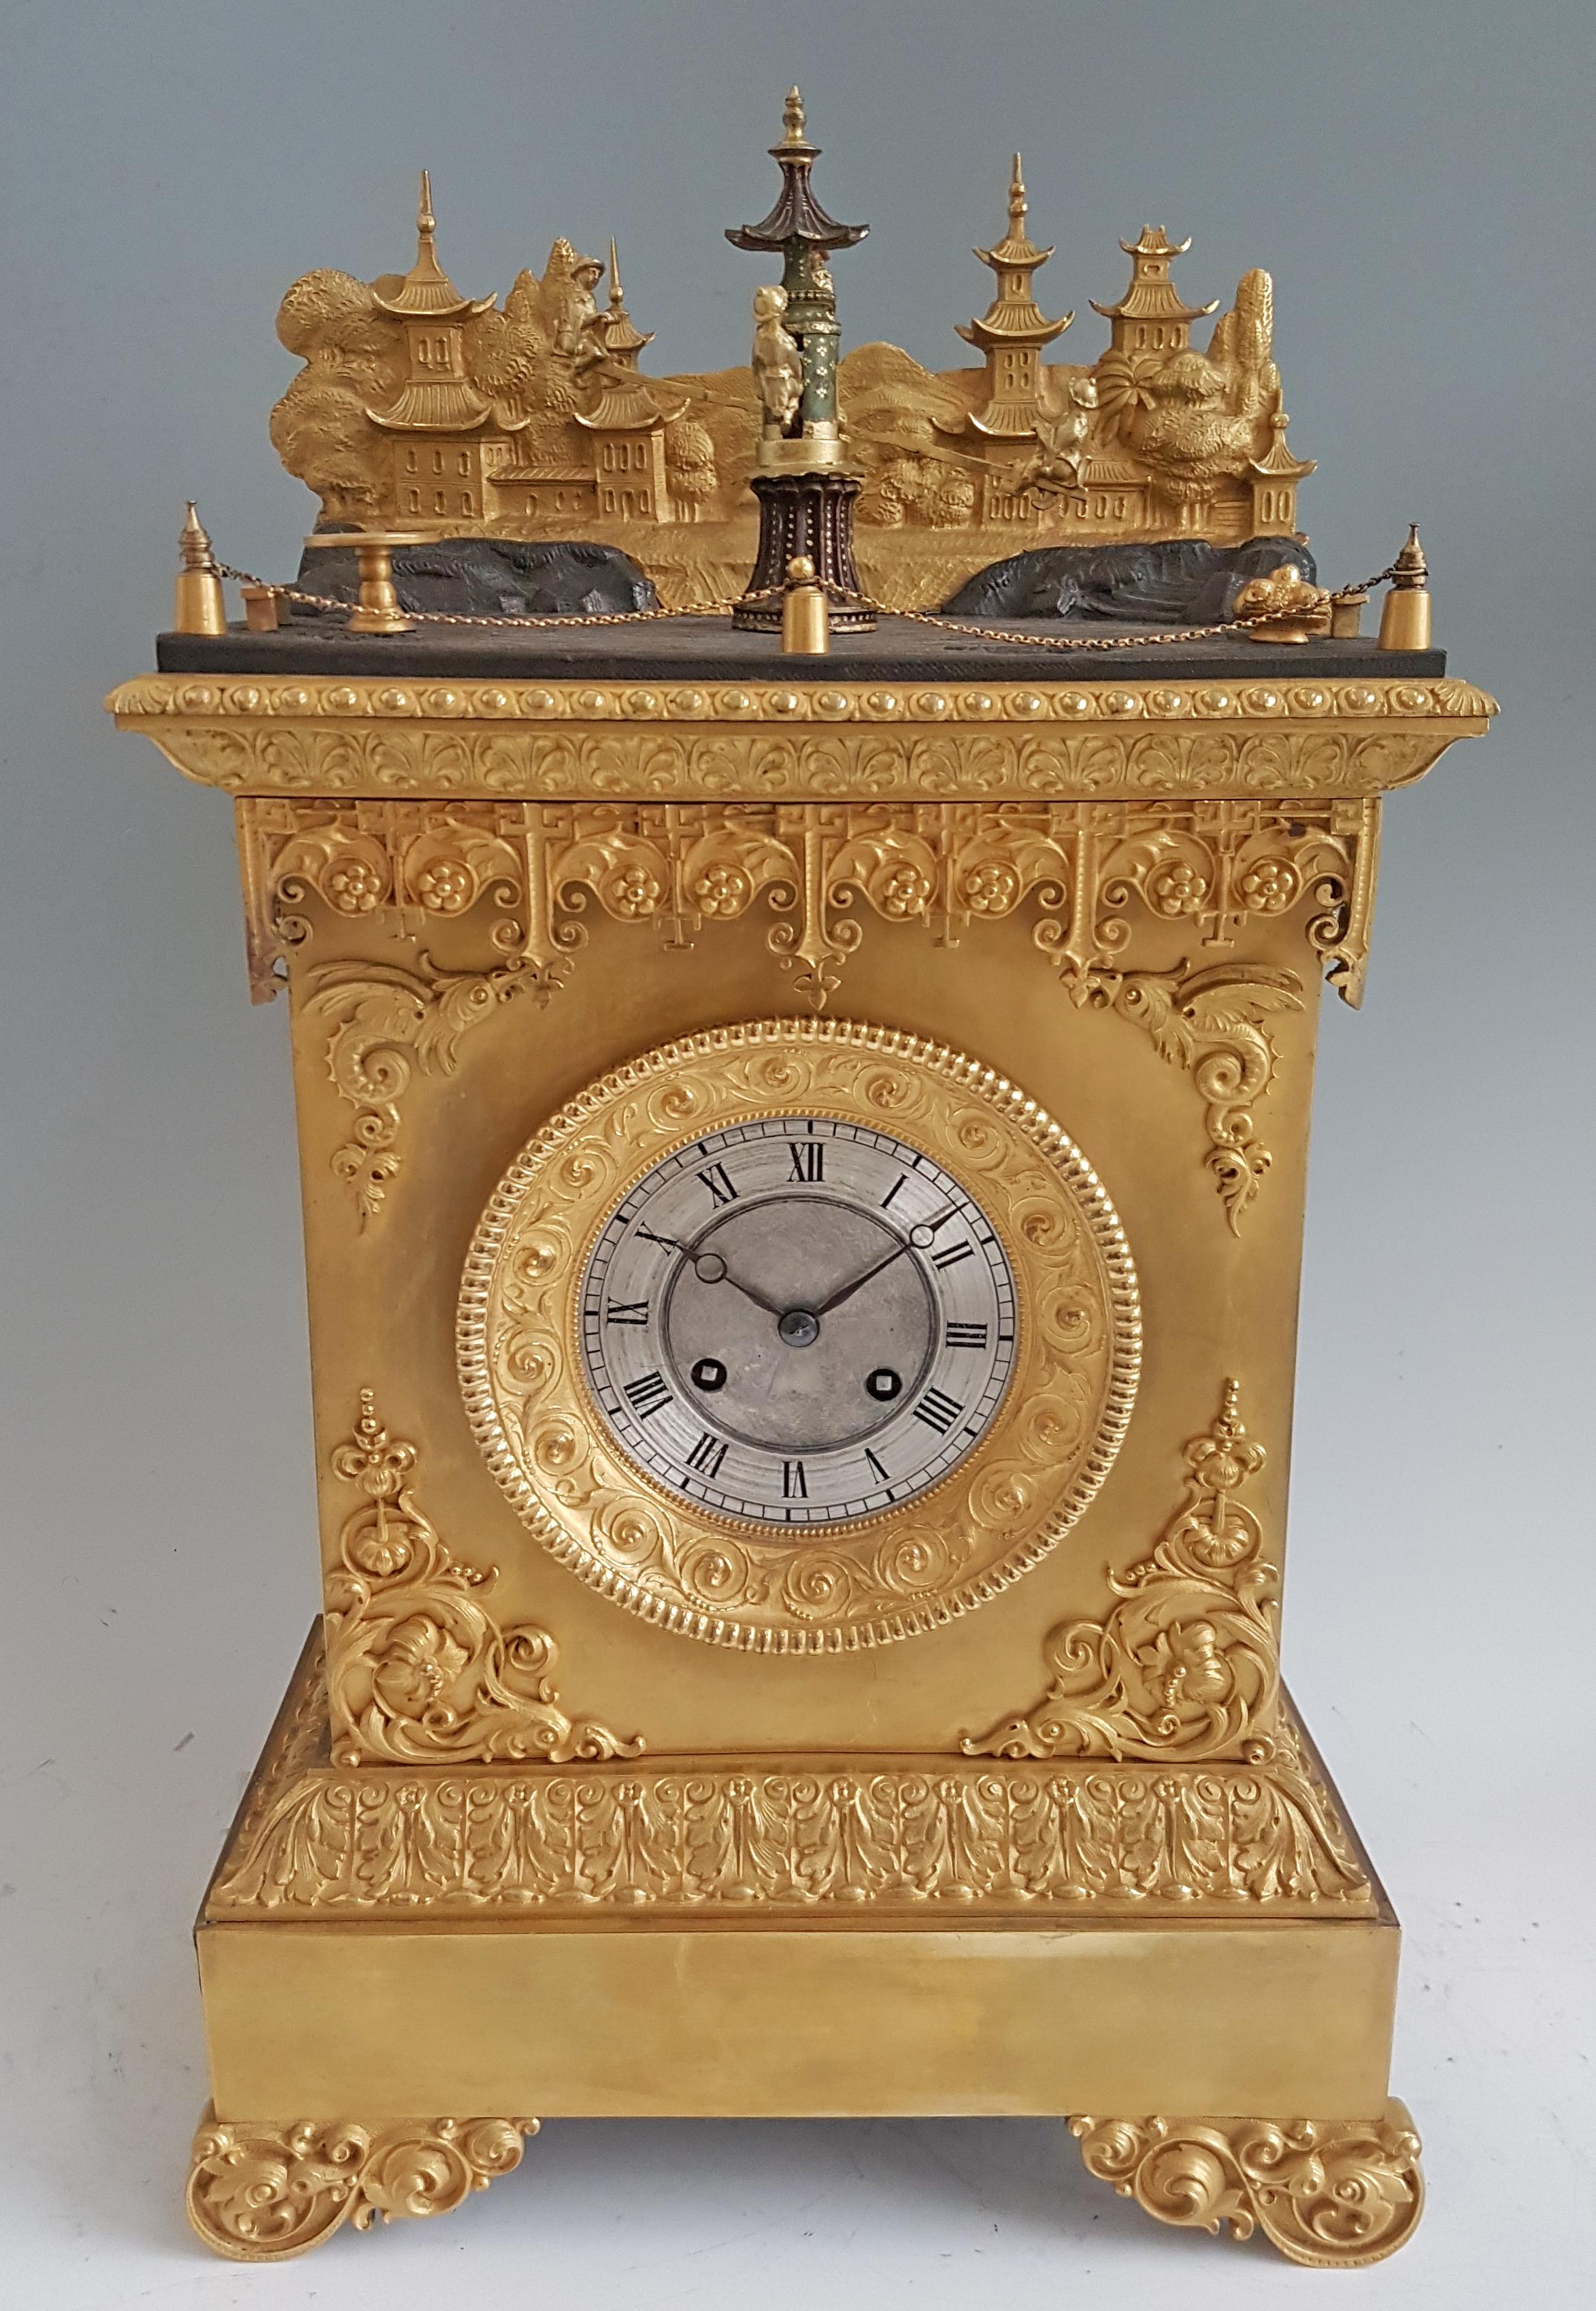 A rare French ormolu chinoiserie automaton mantel clock. The mercury fire gilded ormolu case has elaborate bracket feet to the front, and fine ormolu mounts of anthemion to the front below the dial, whilst above are two very fine mounts depicting